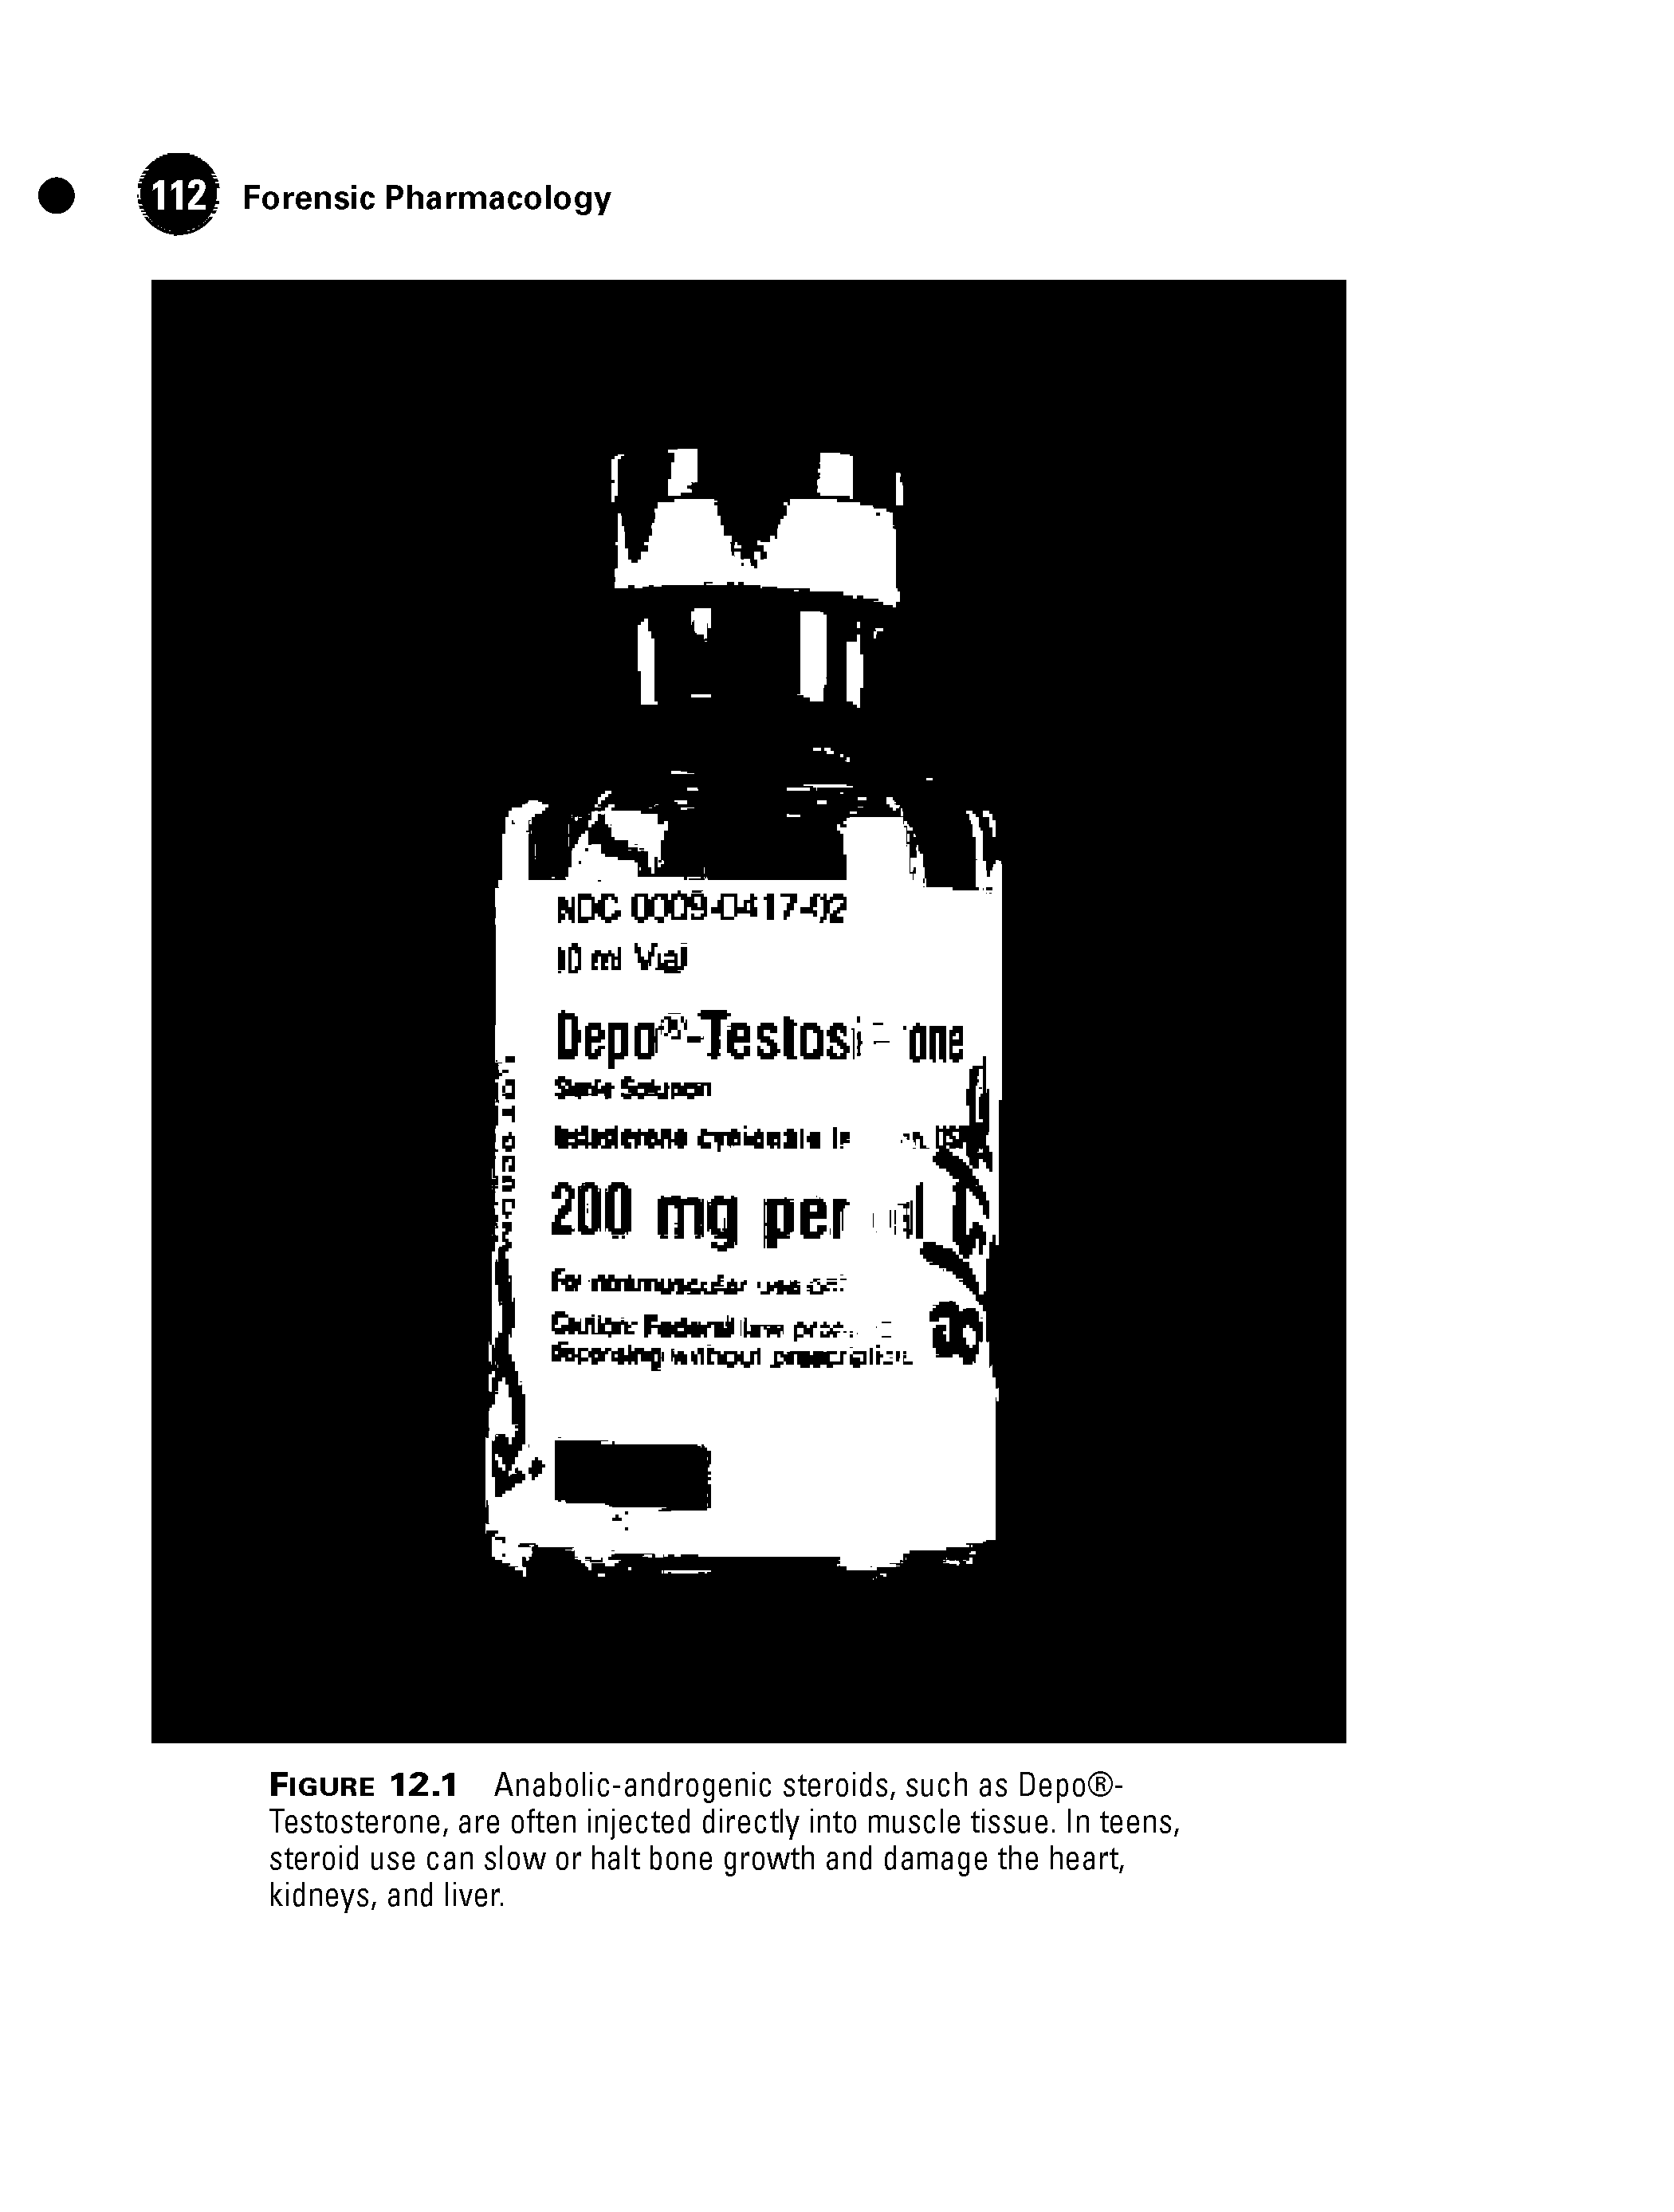 Figure 12.1 Anabolic-androgenic steroids, such as Depo -Testosterone, are often injected directly into muscle tissue. In teens, steroid use can slow or halt bone growth and damage the heart, kidneys, and liver.